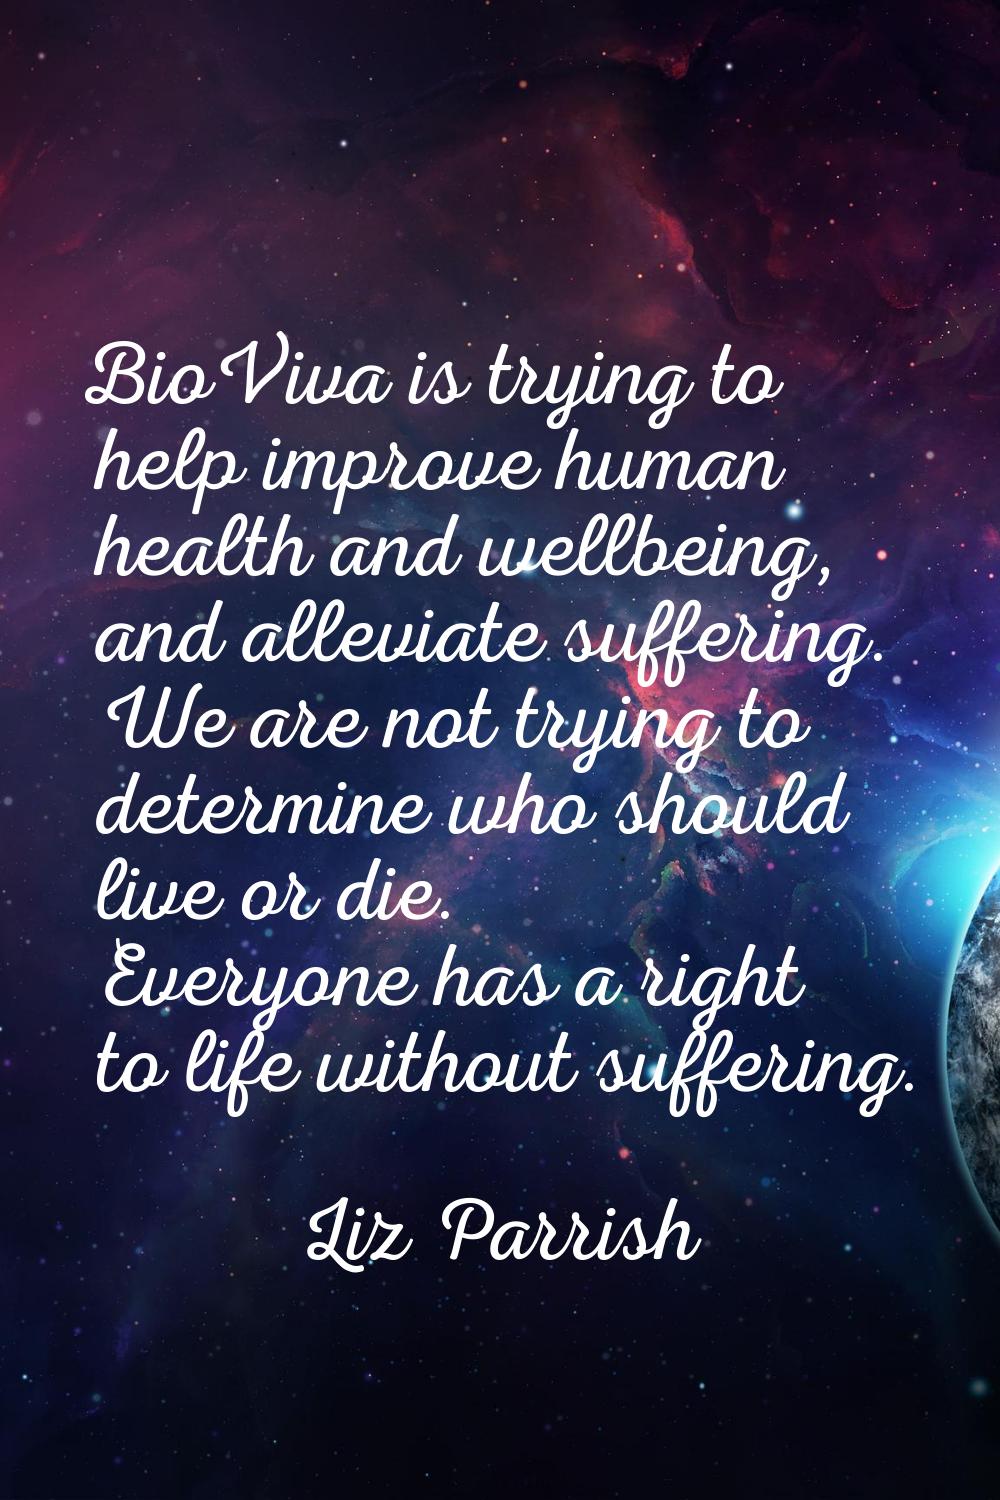 BioViva is trying to help improve human health and wellbeing, and alleviate suffering. We are not t